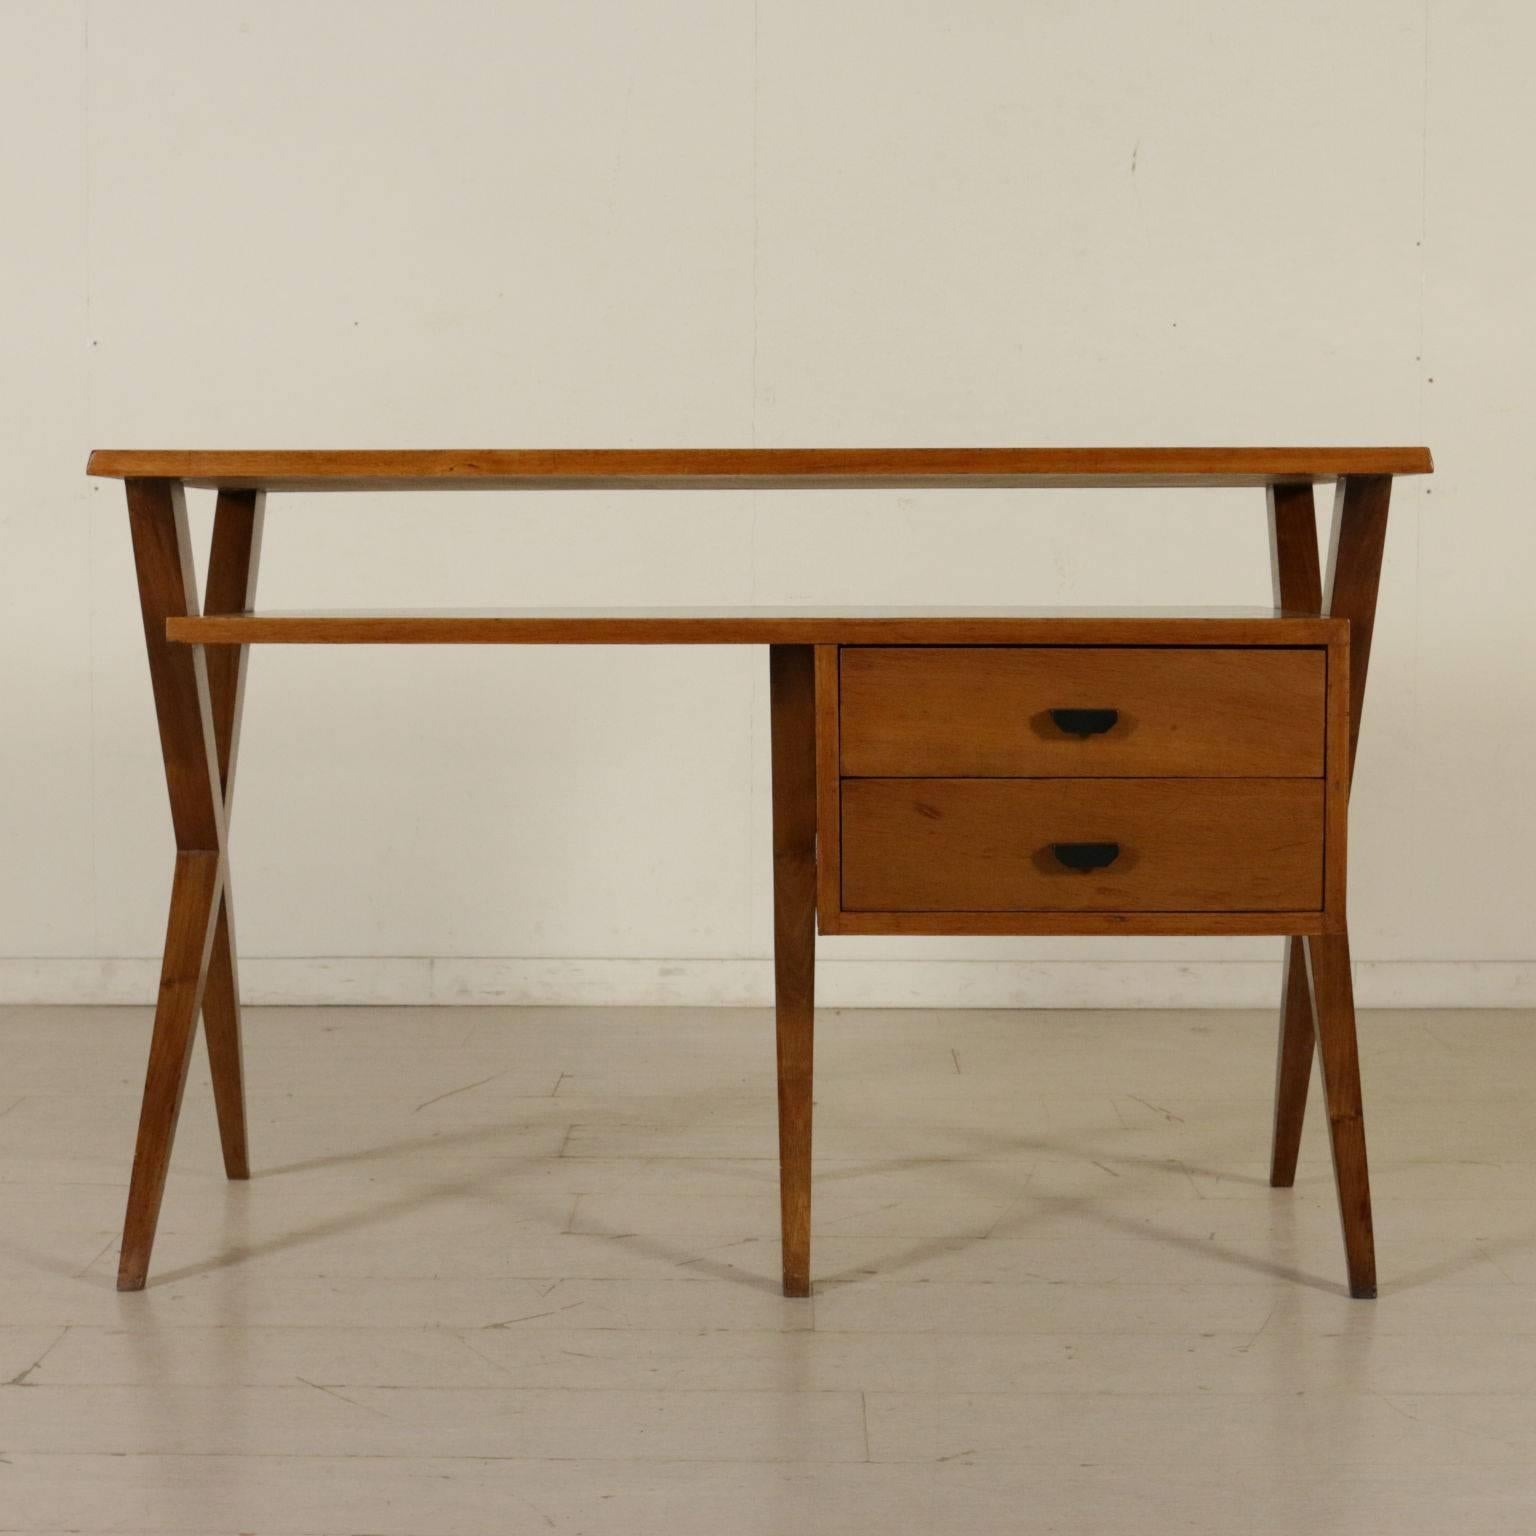 A writing desk with drawers, solid walnut and walnut veneer, Formica covered top. Manufactured in Italy, 1950s.